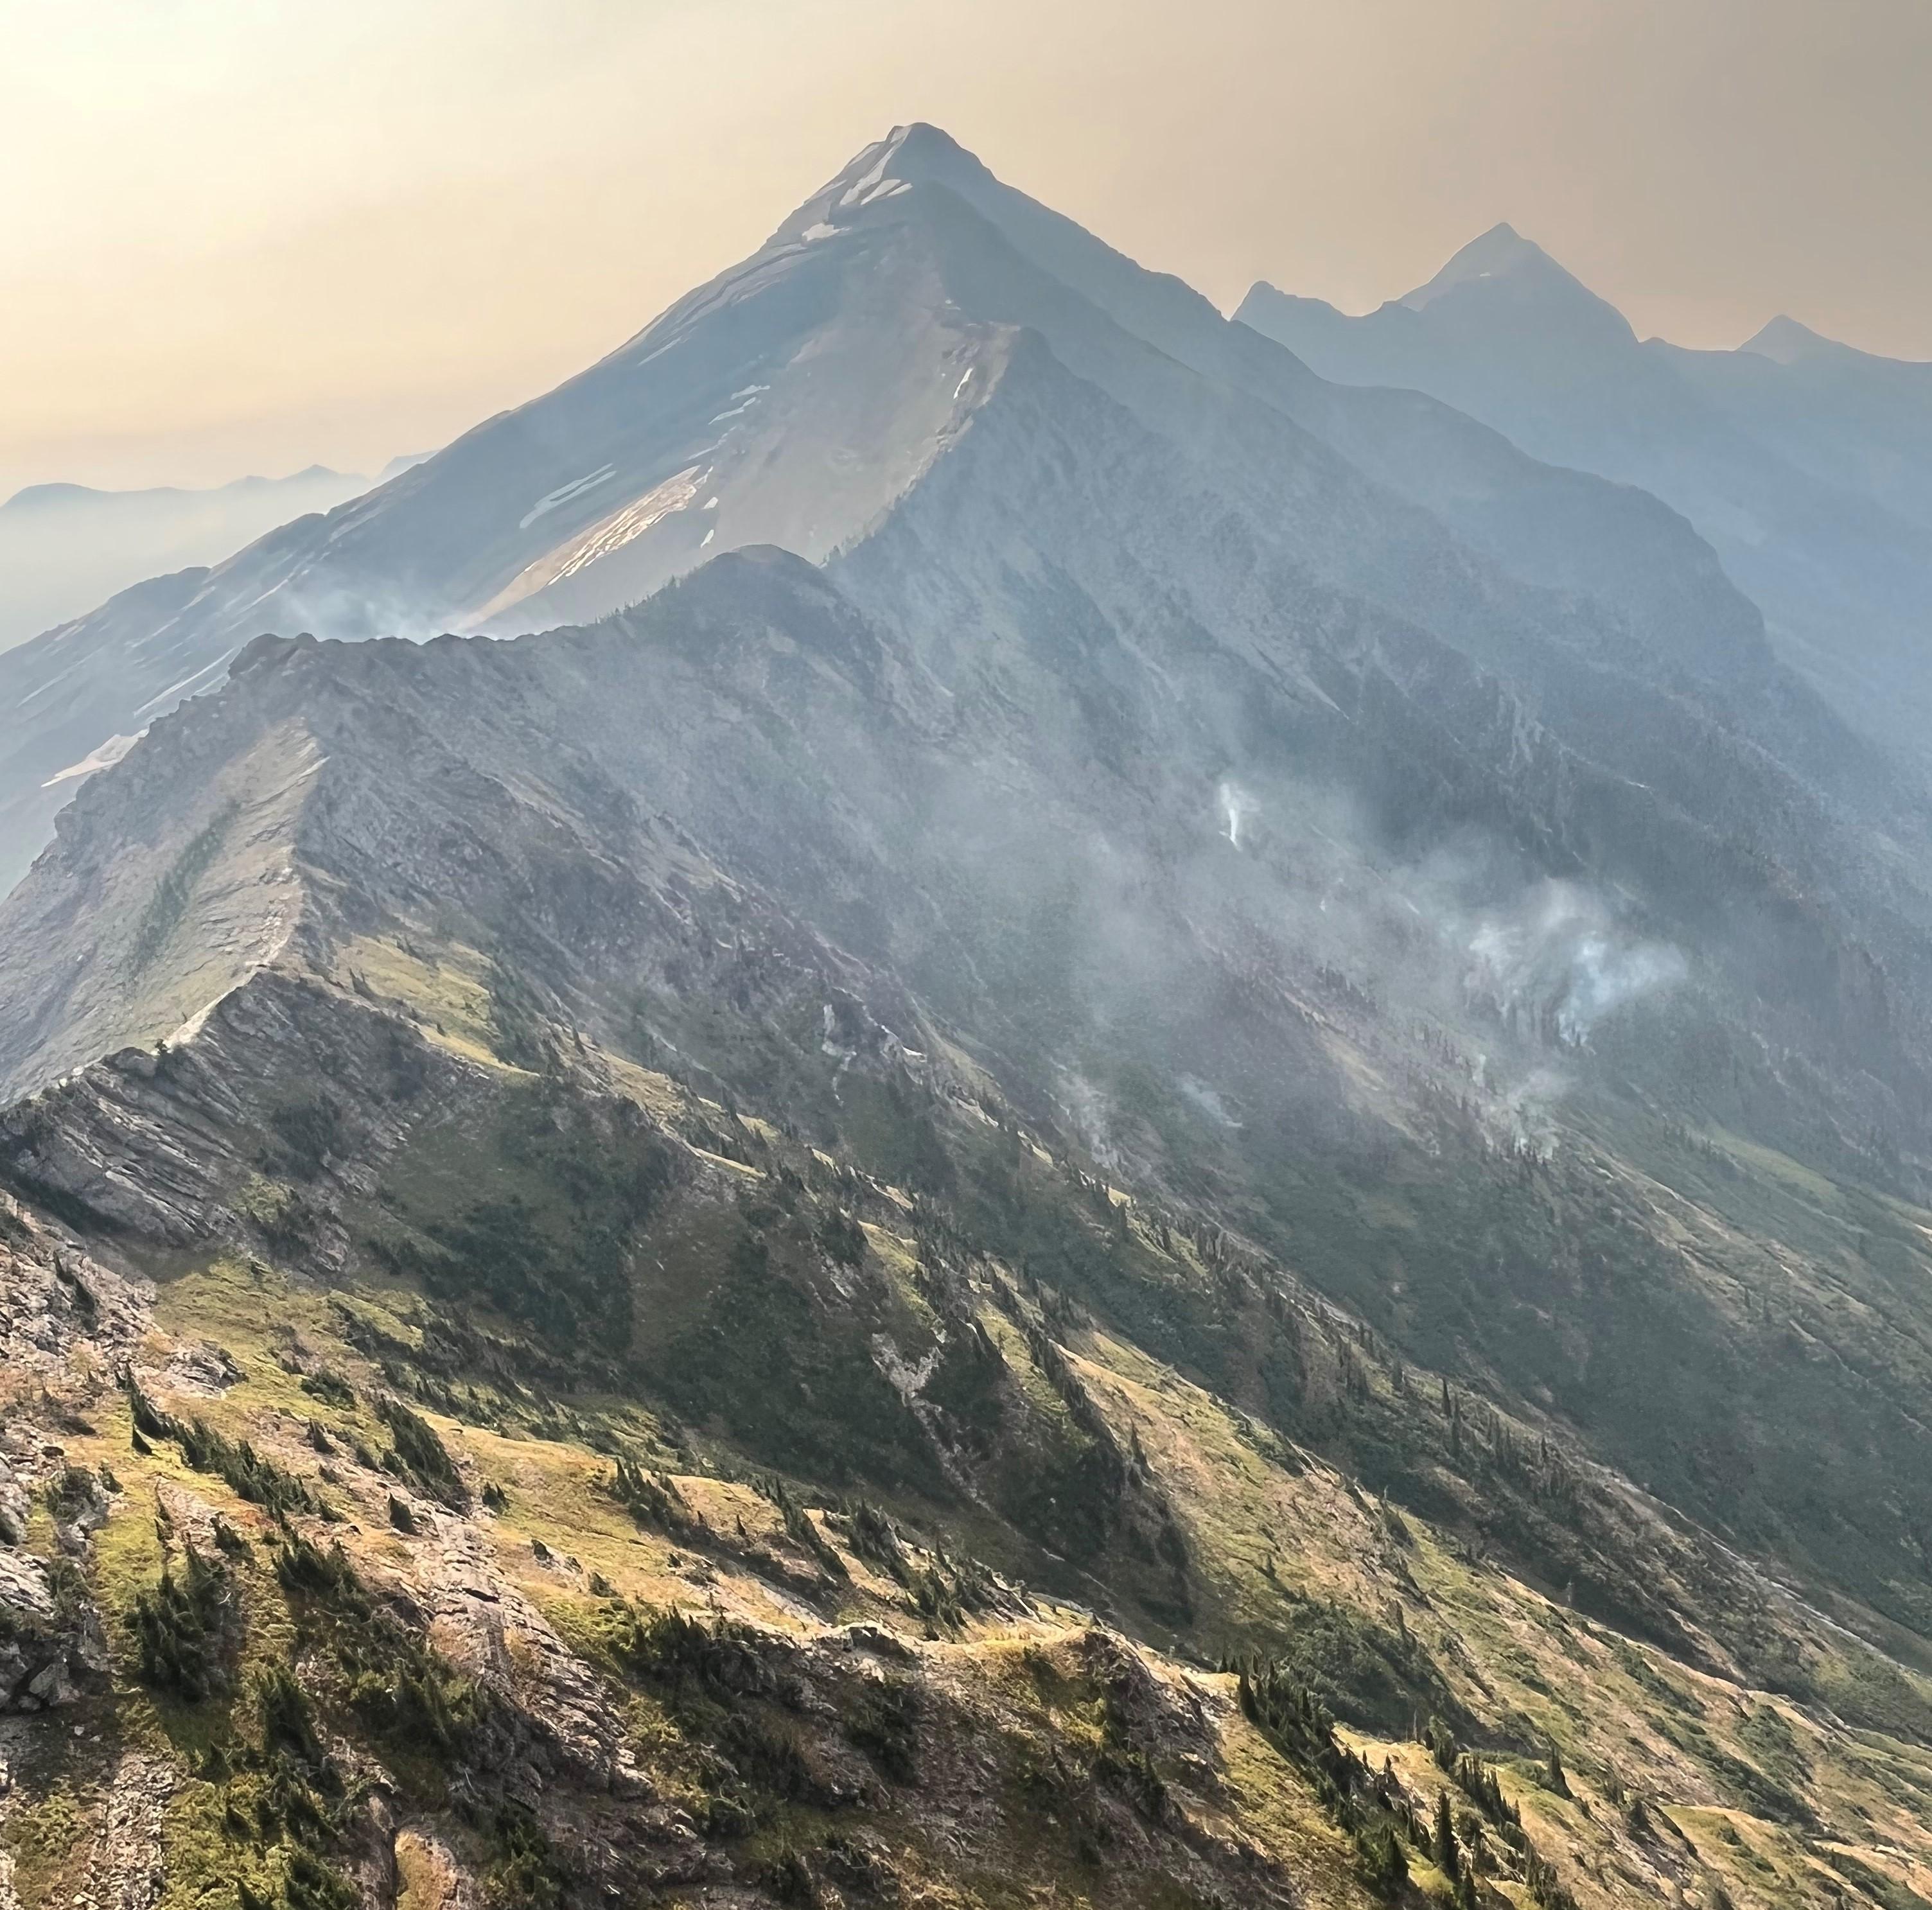 Bits of smoke rise from steep slopes along a ridge, with a rocky peak in the background and hazy skies.